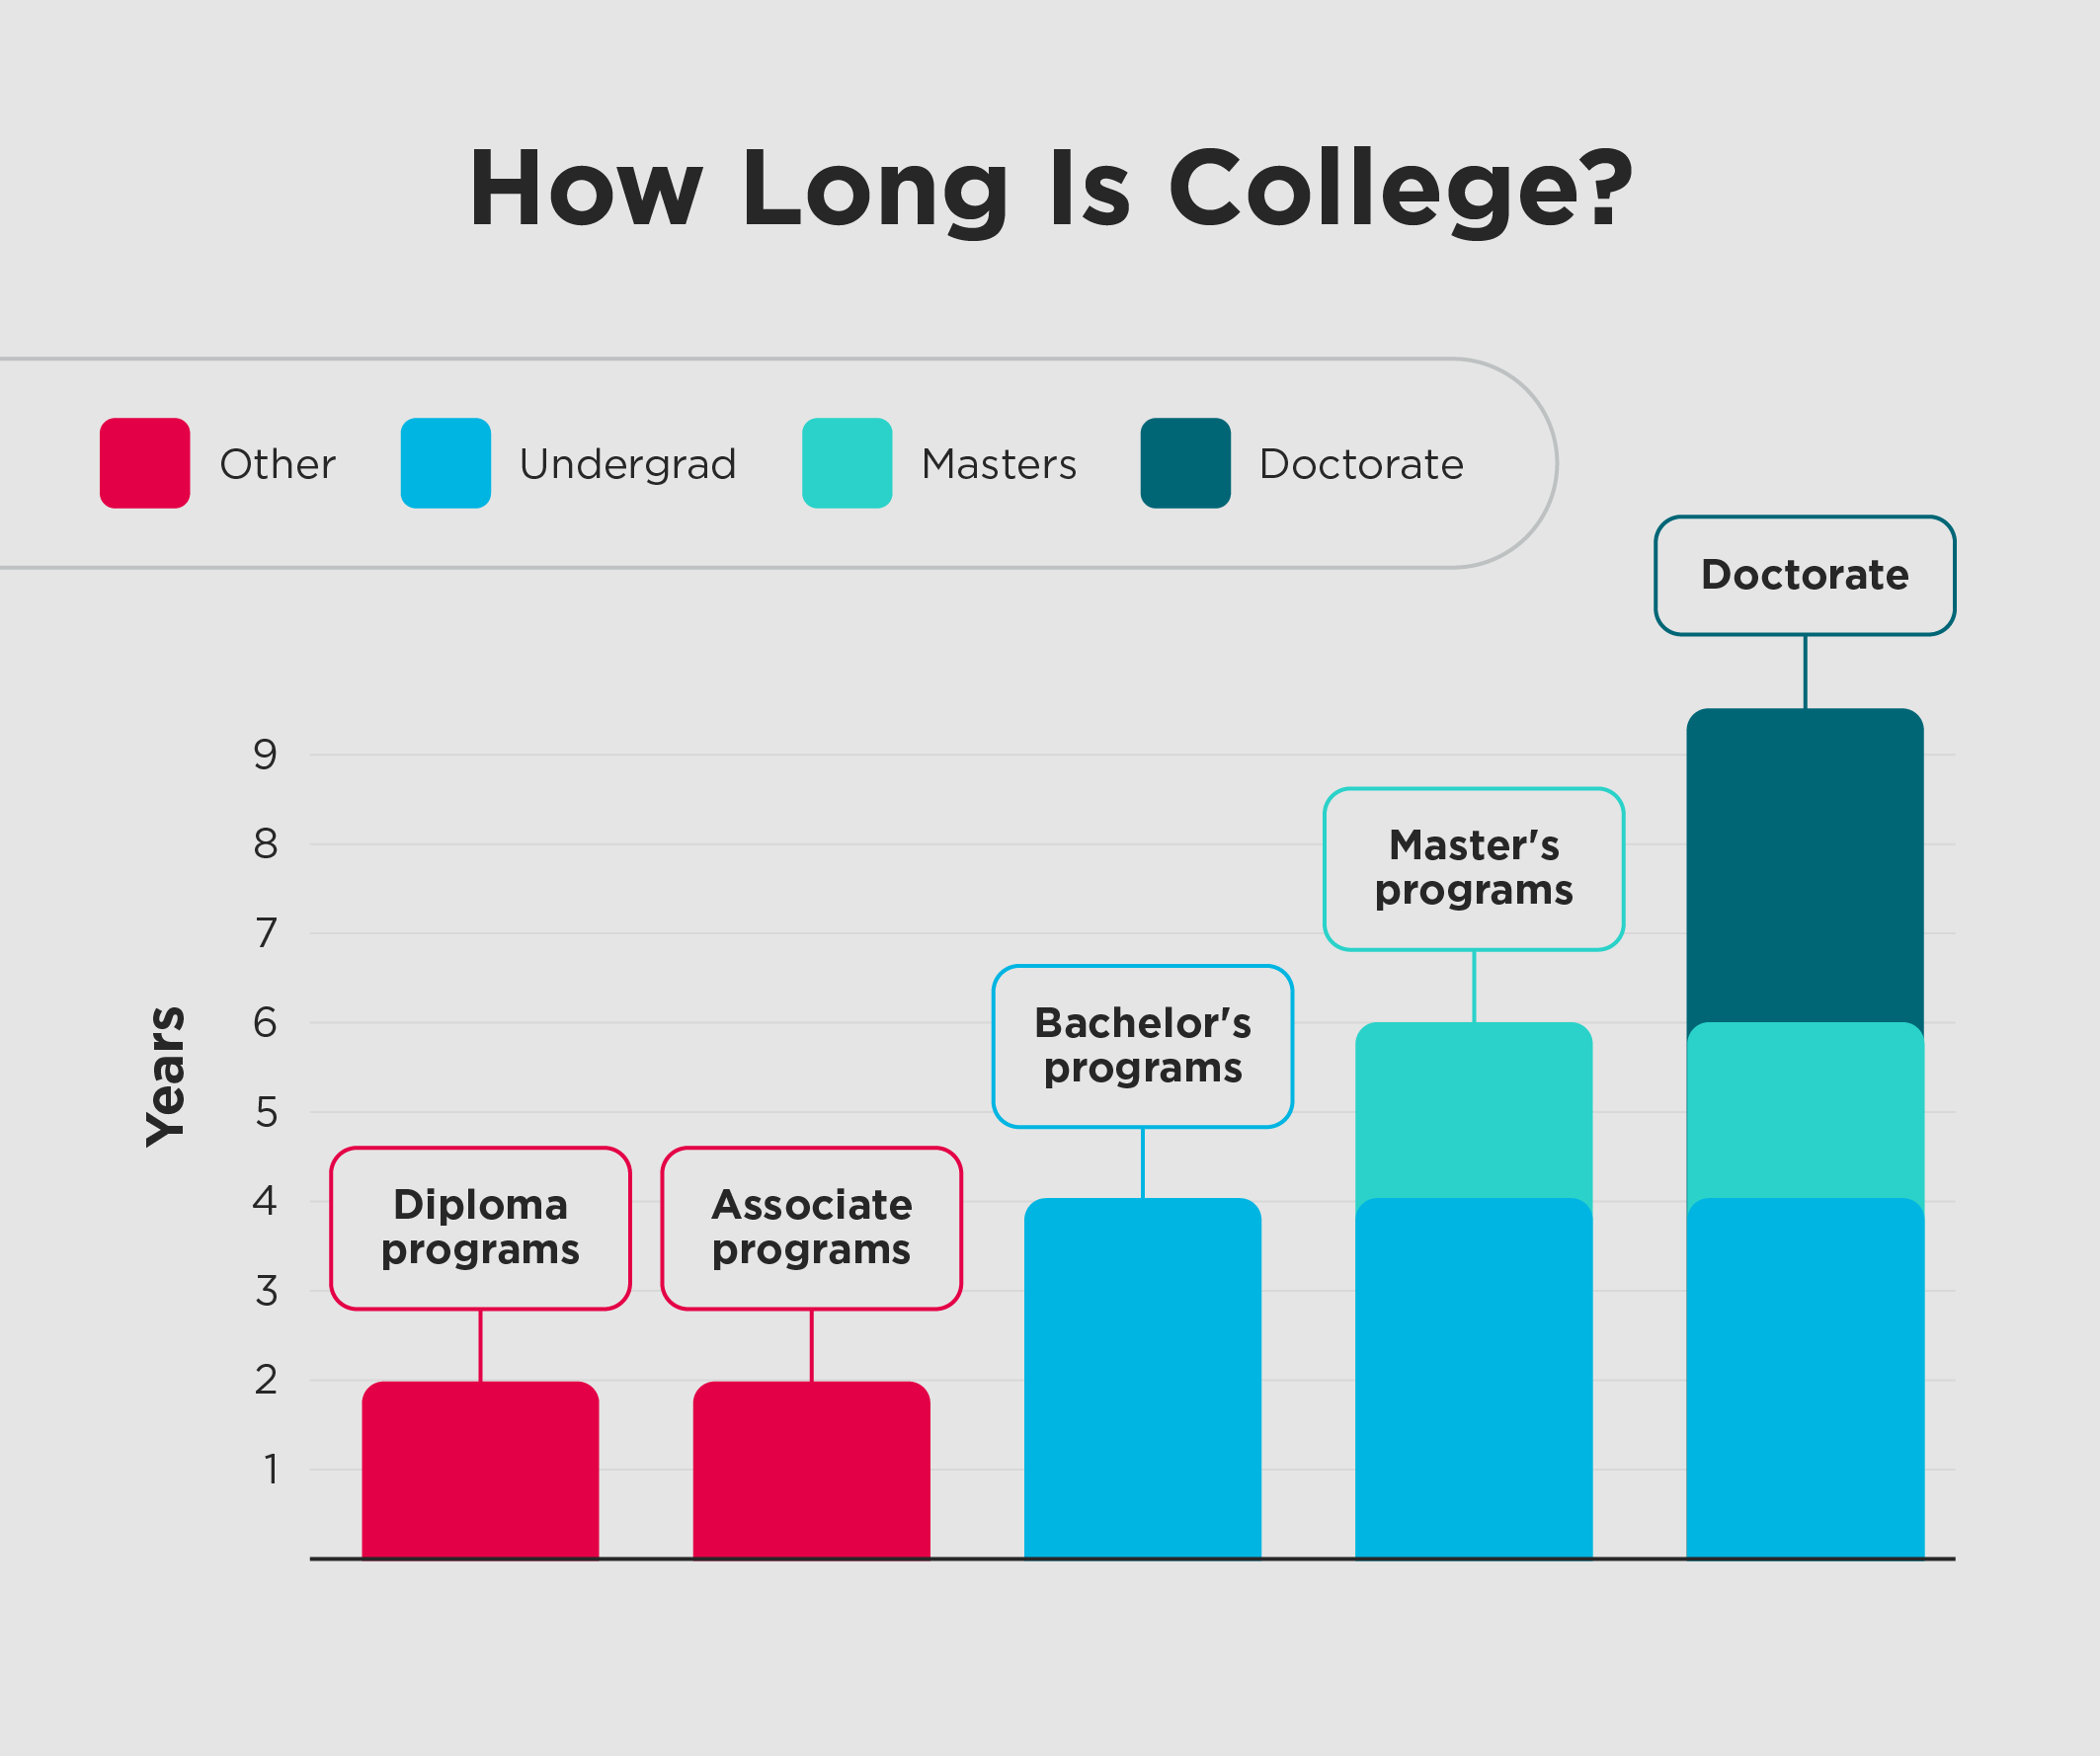 Bar graph showing how long college is based on program type